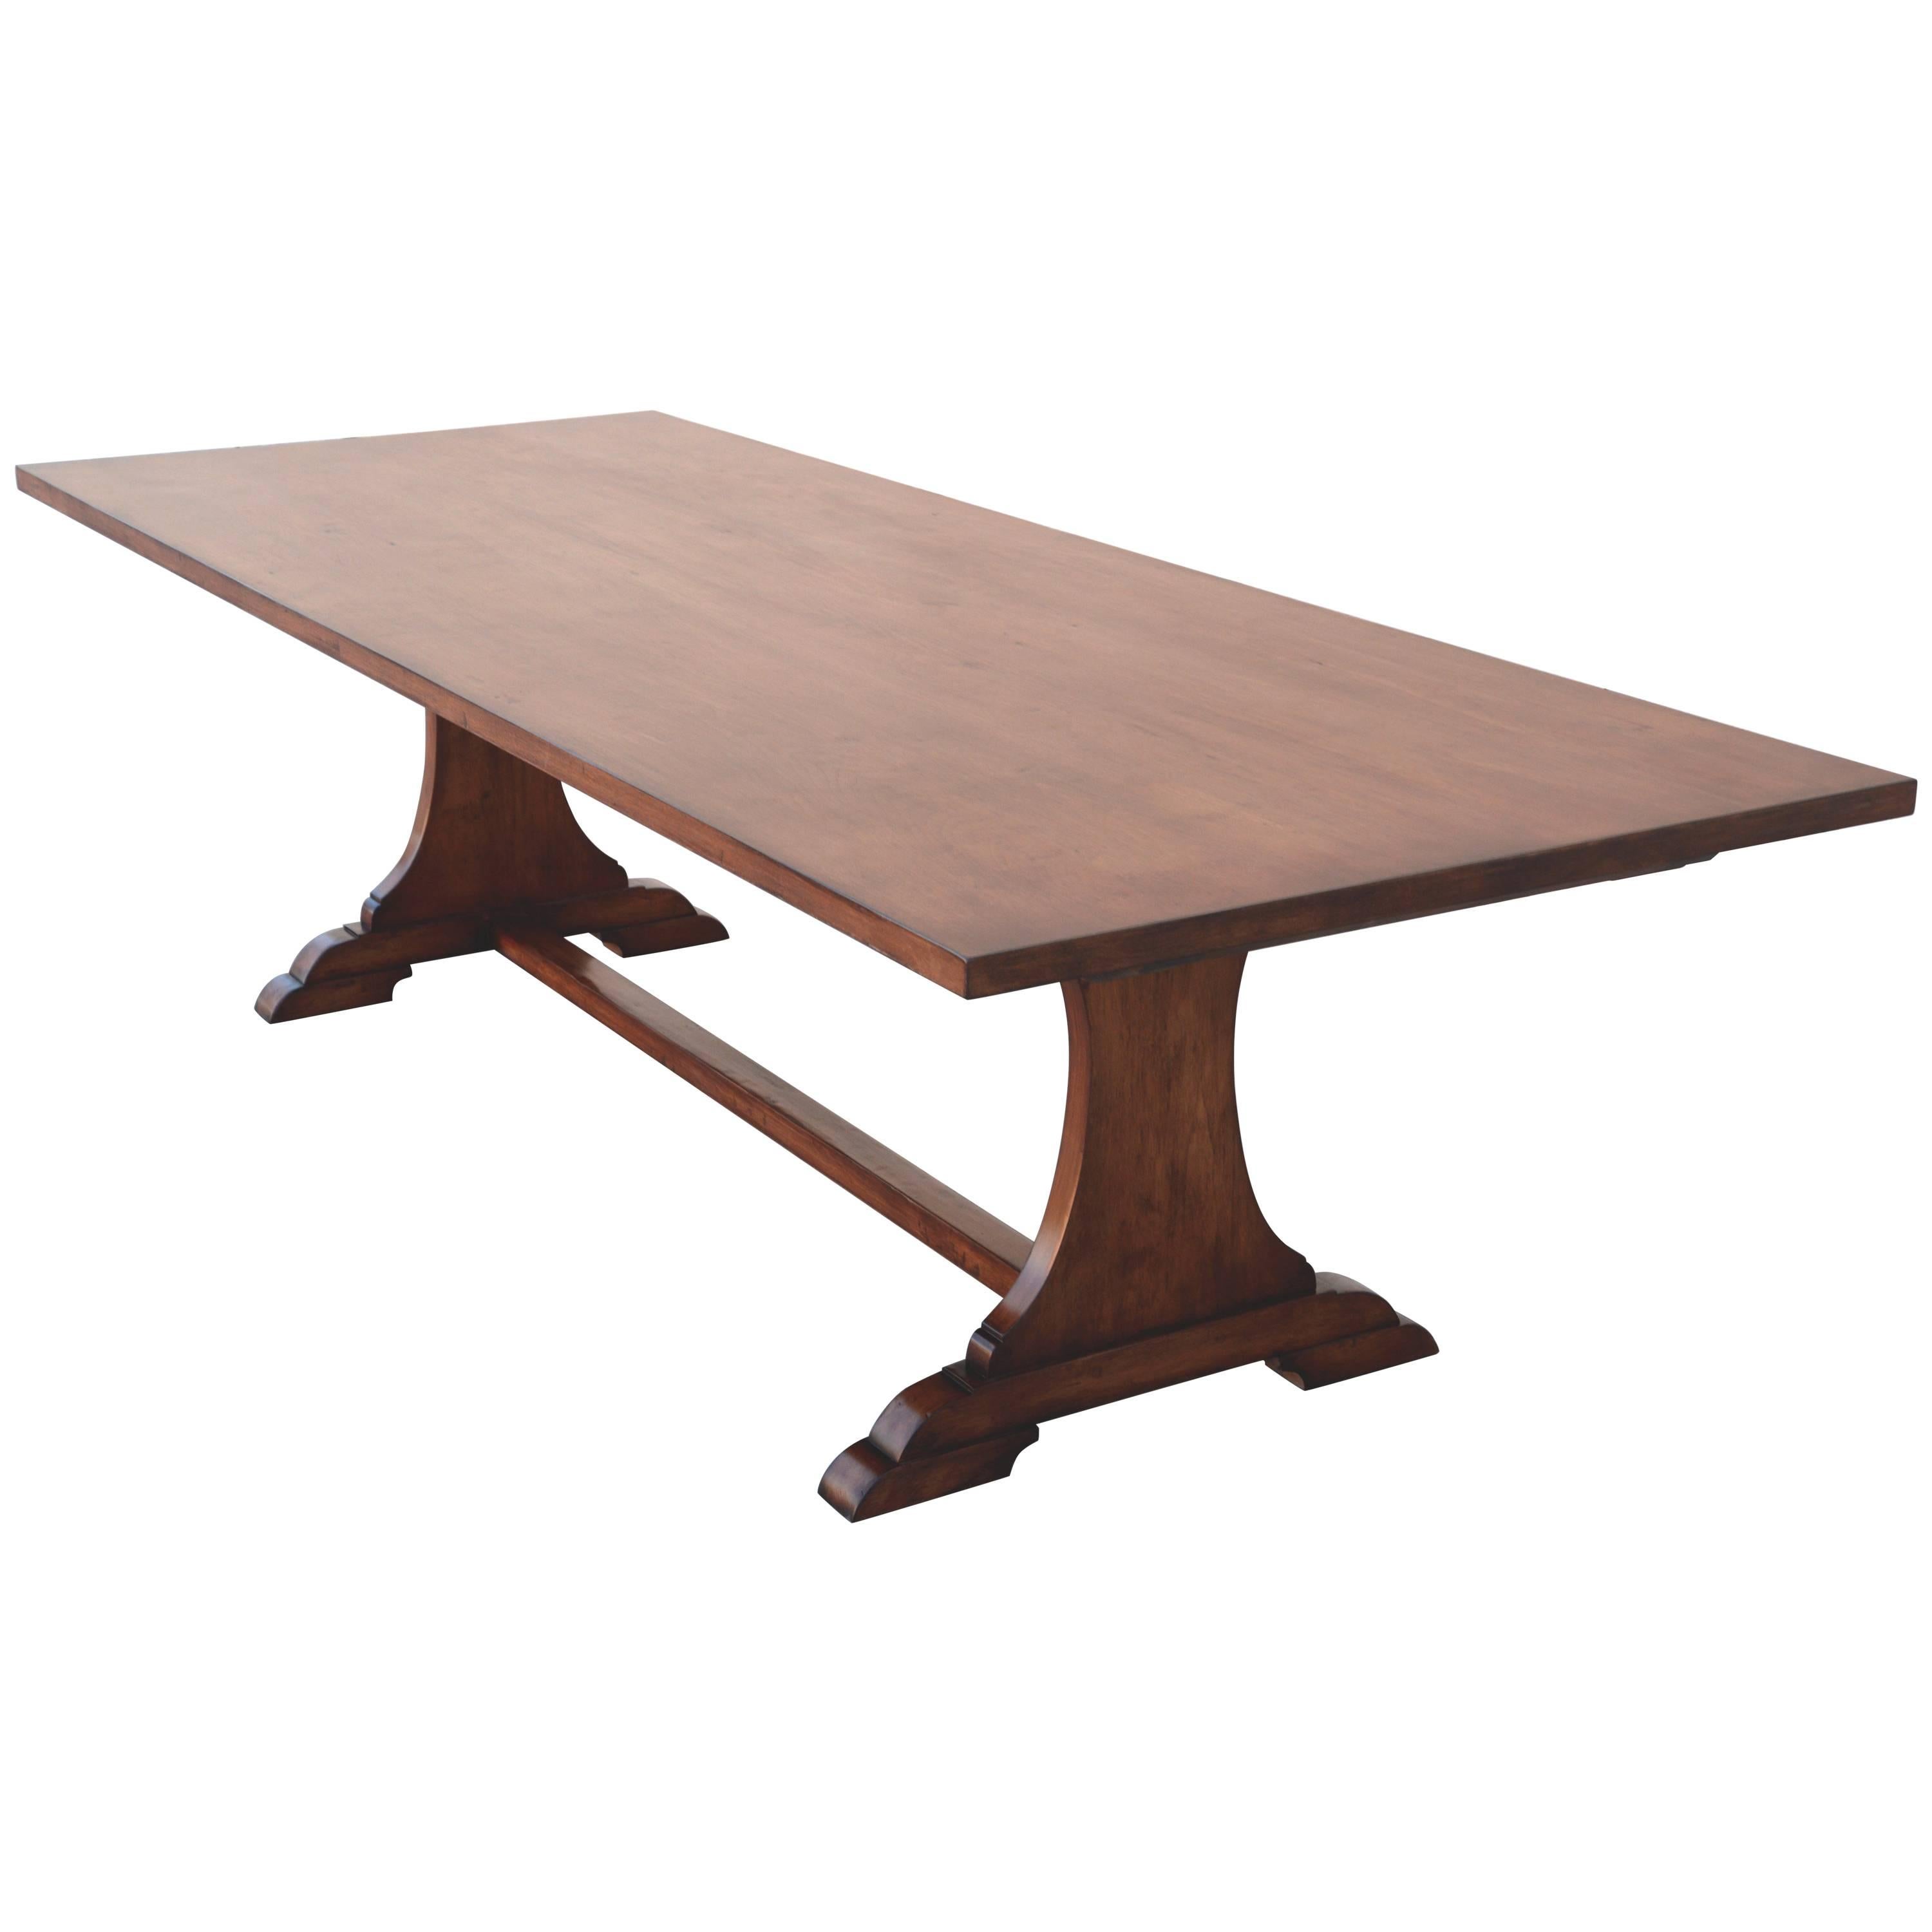 Carina Dining Table in Dry Aged Walnut with Extensions (custom)